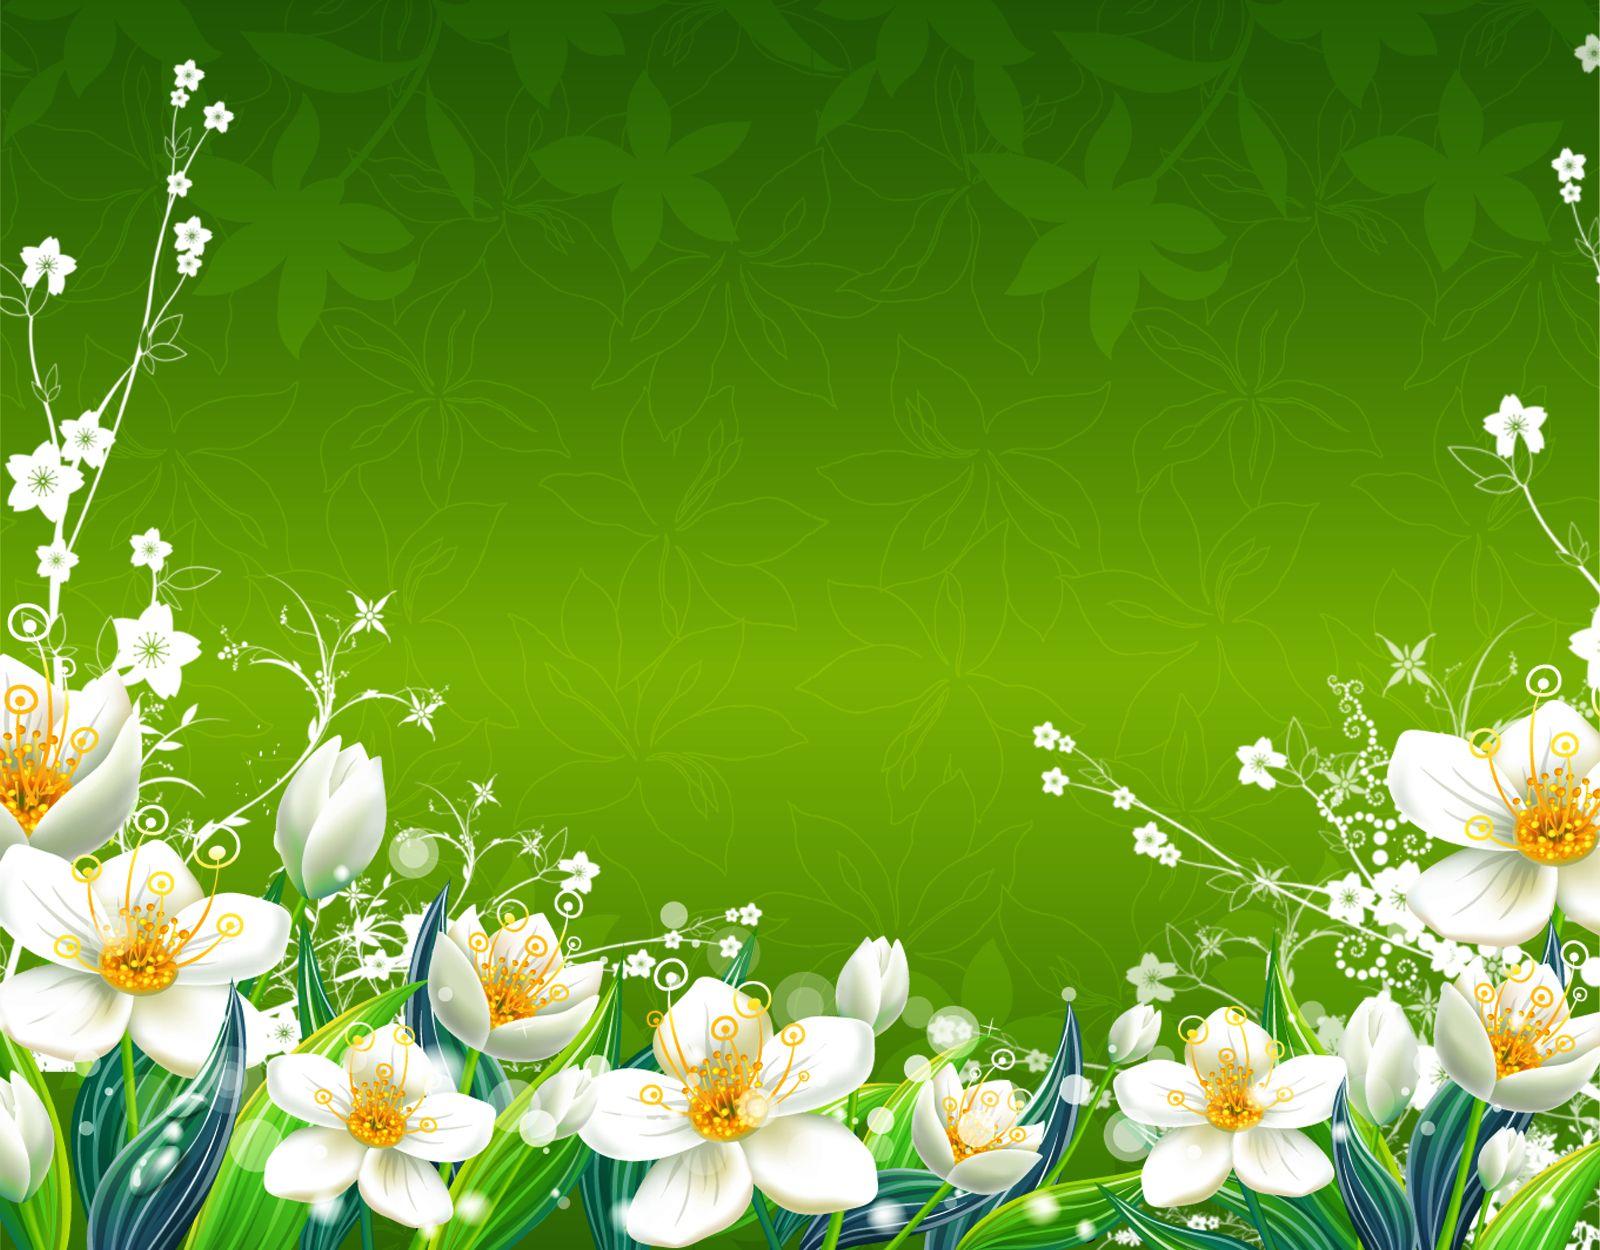 Rustic Floral Large Green Leaves Wallpaper Murals in India  Giffywalls